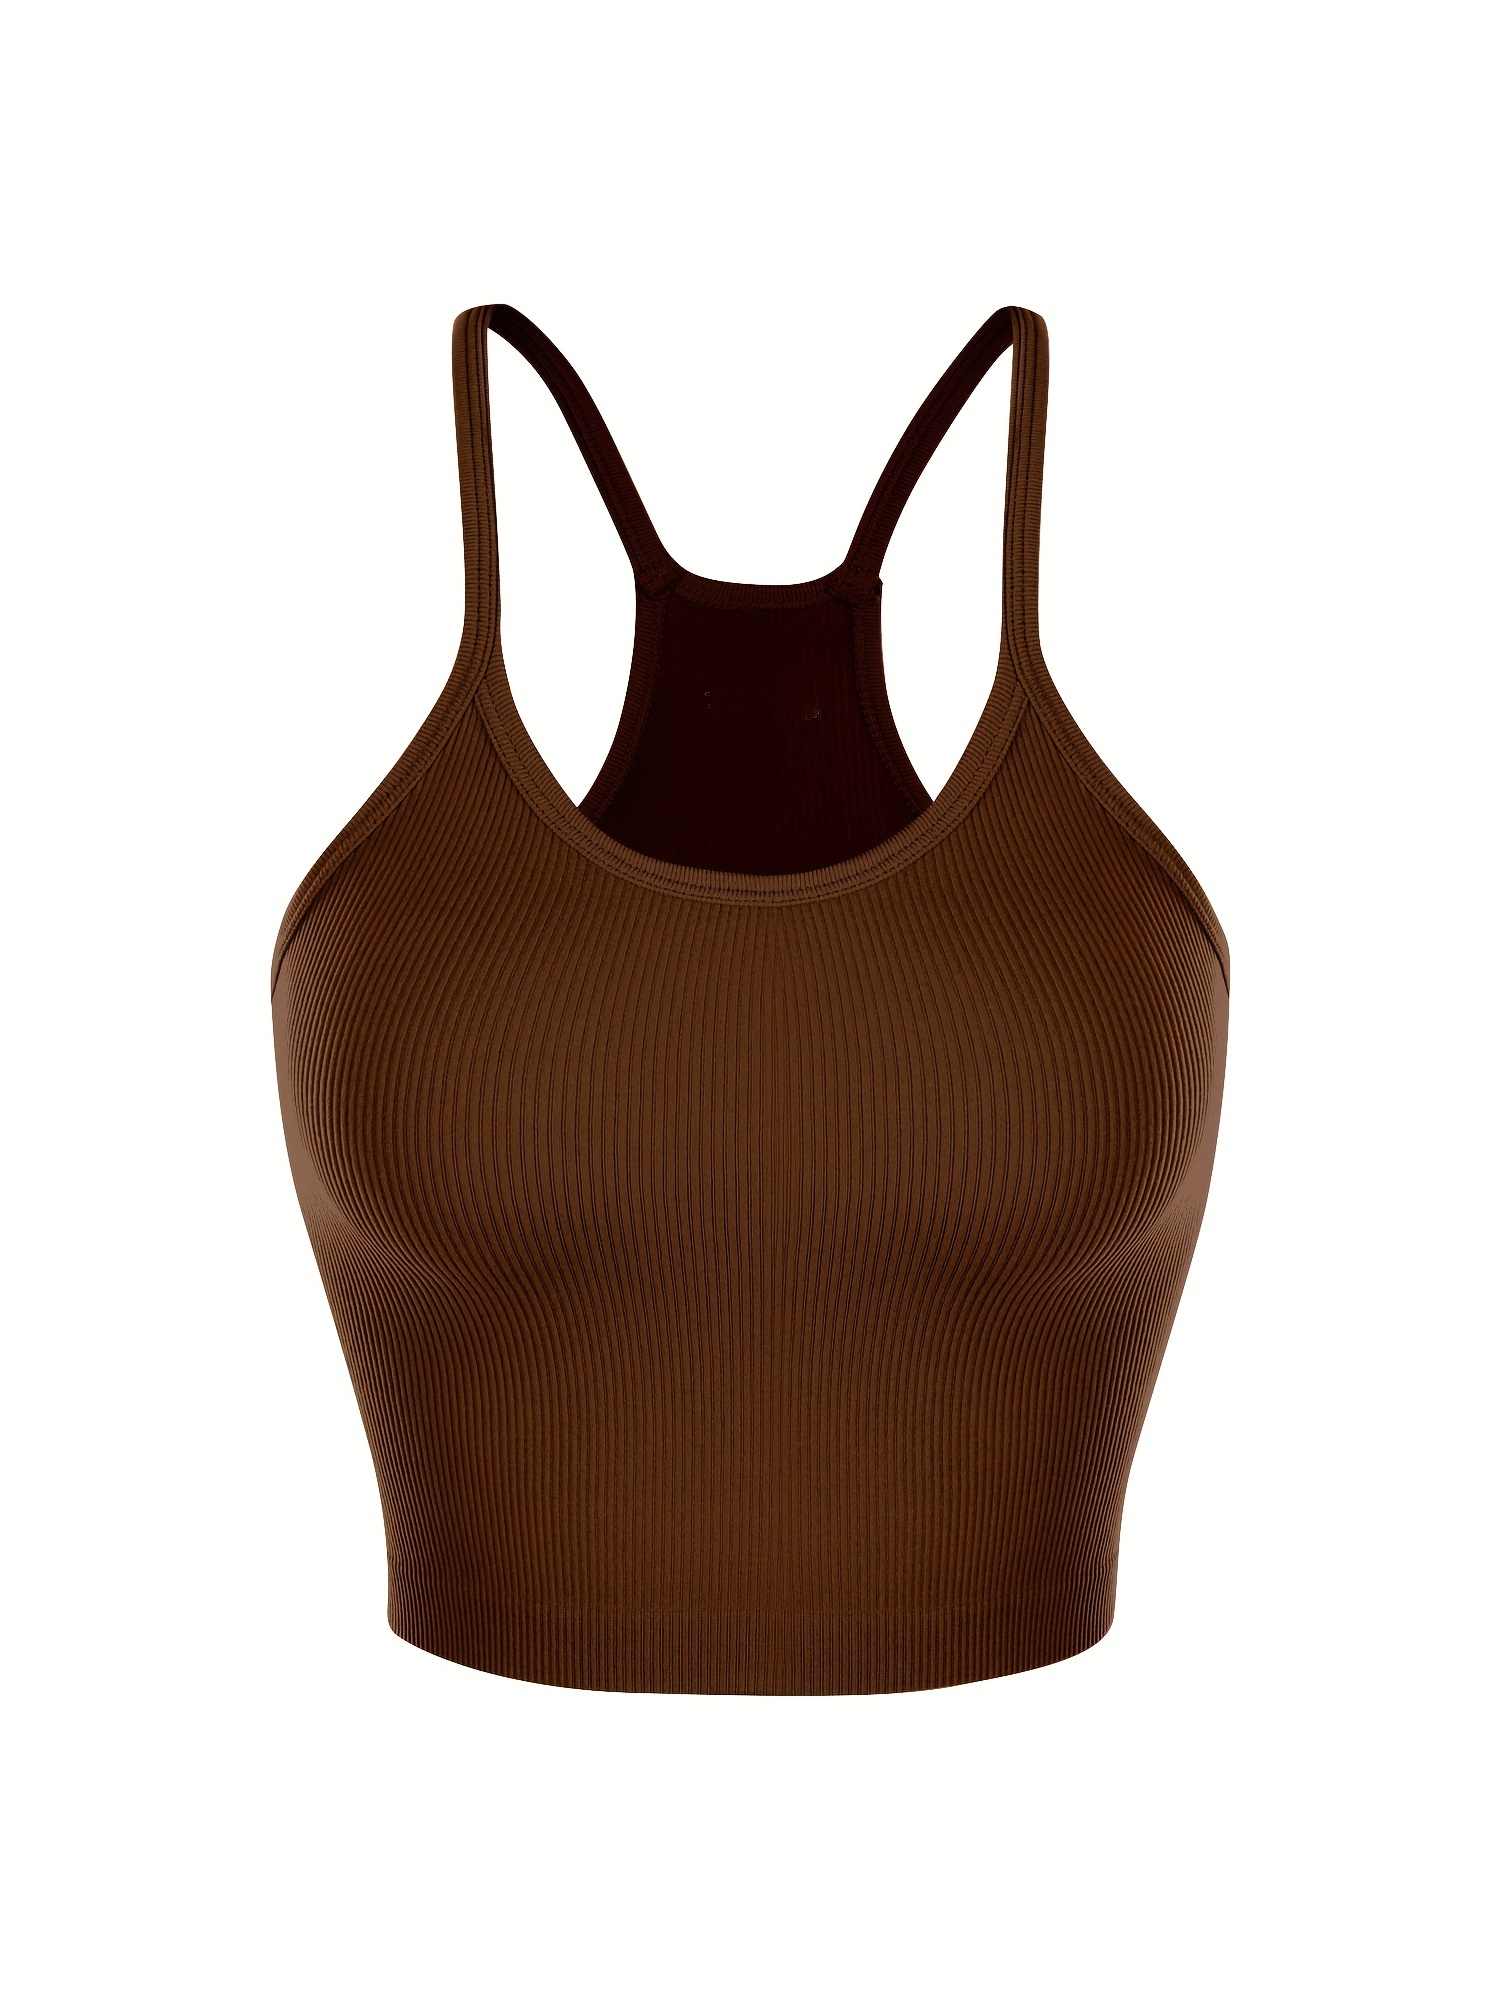 Womens Ribbed Cropped Sport Bra Low Impact, Seamless, Ideal For